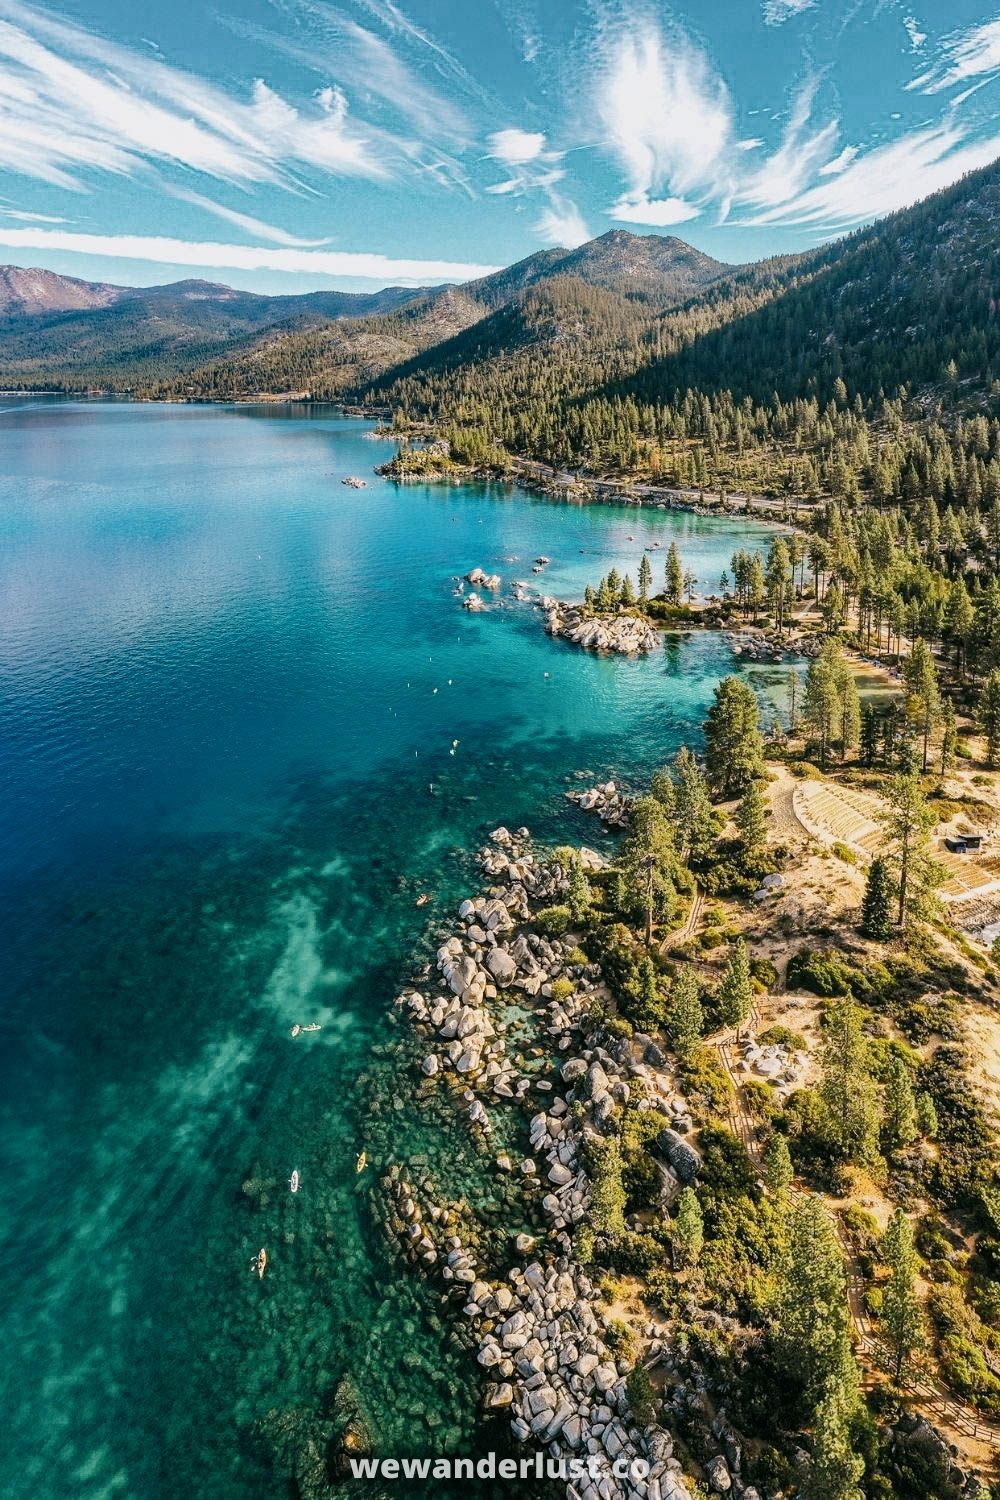 12 Free and Cheap Things to Do in South Lake Tahoe: A Fun-Filled Vacation on a Budget